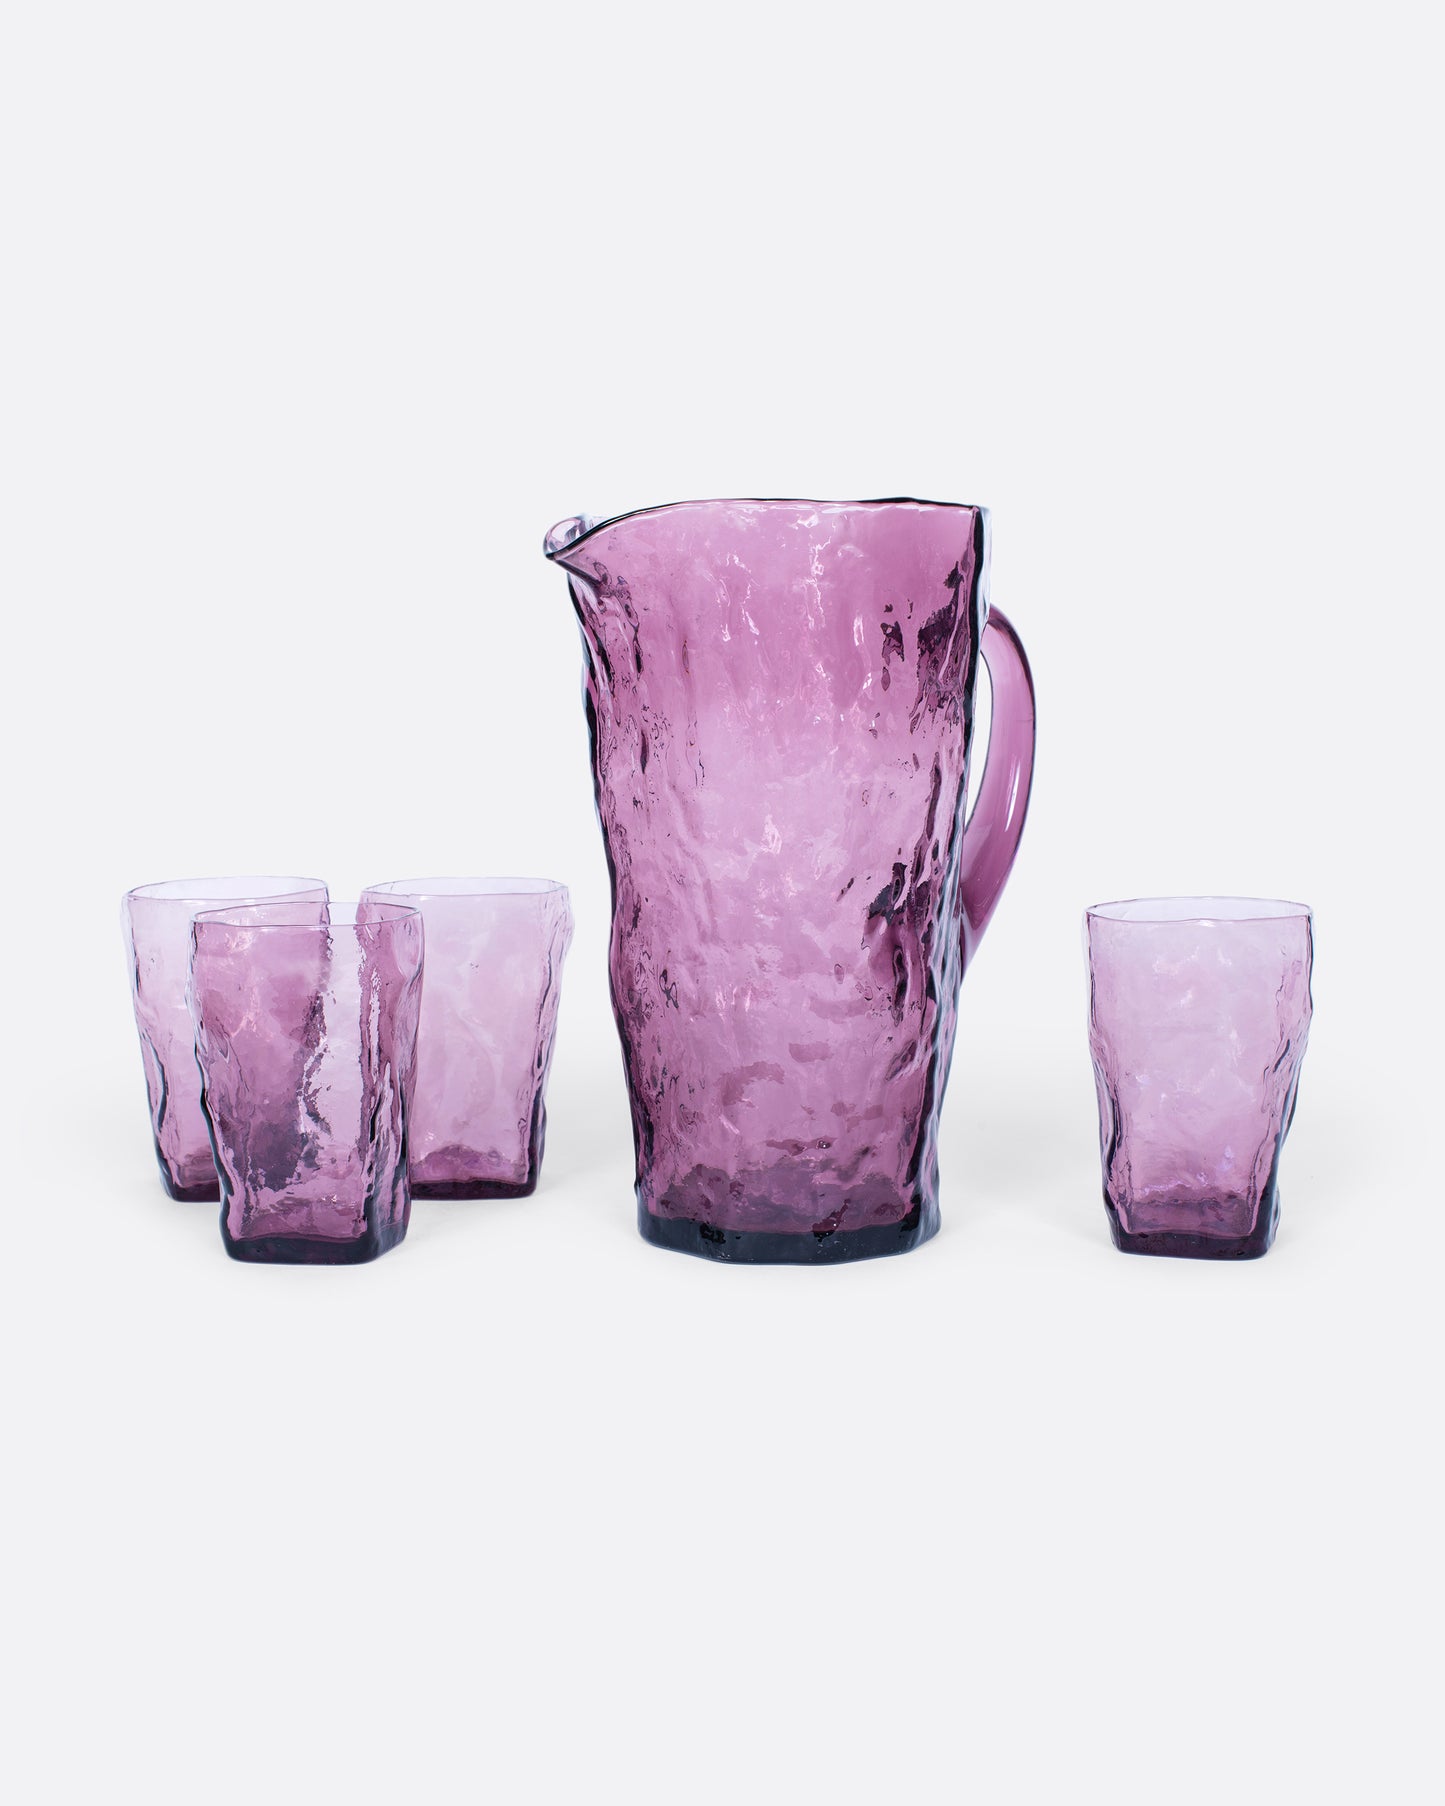 The perfect summer set to serve anything from water to sangria. The cups are squared and comfortable in the hand.